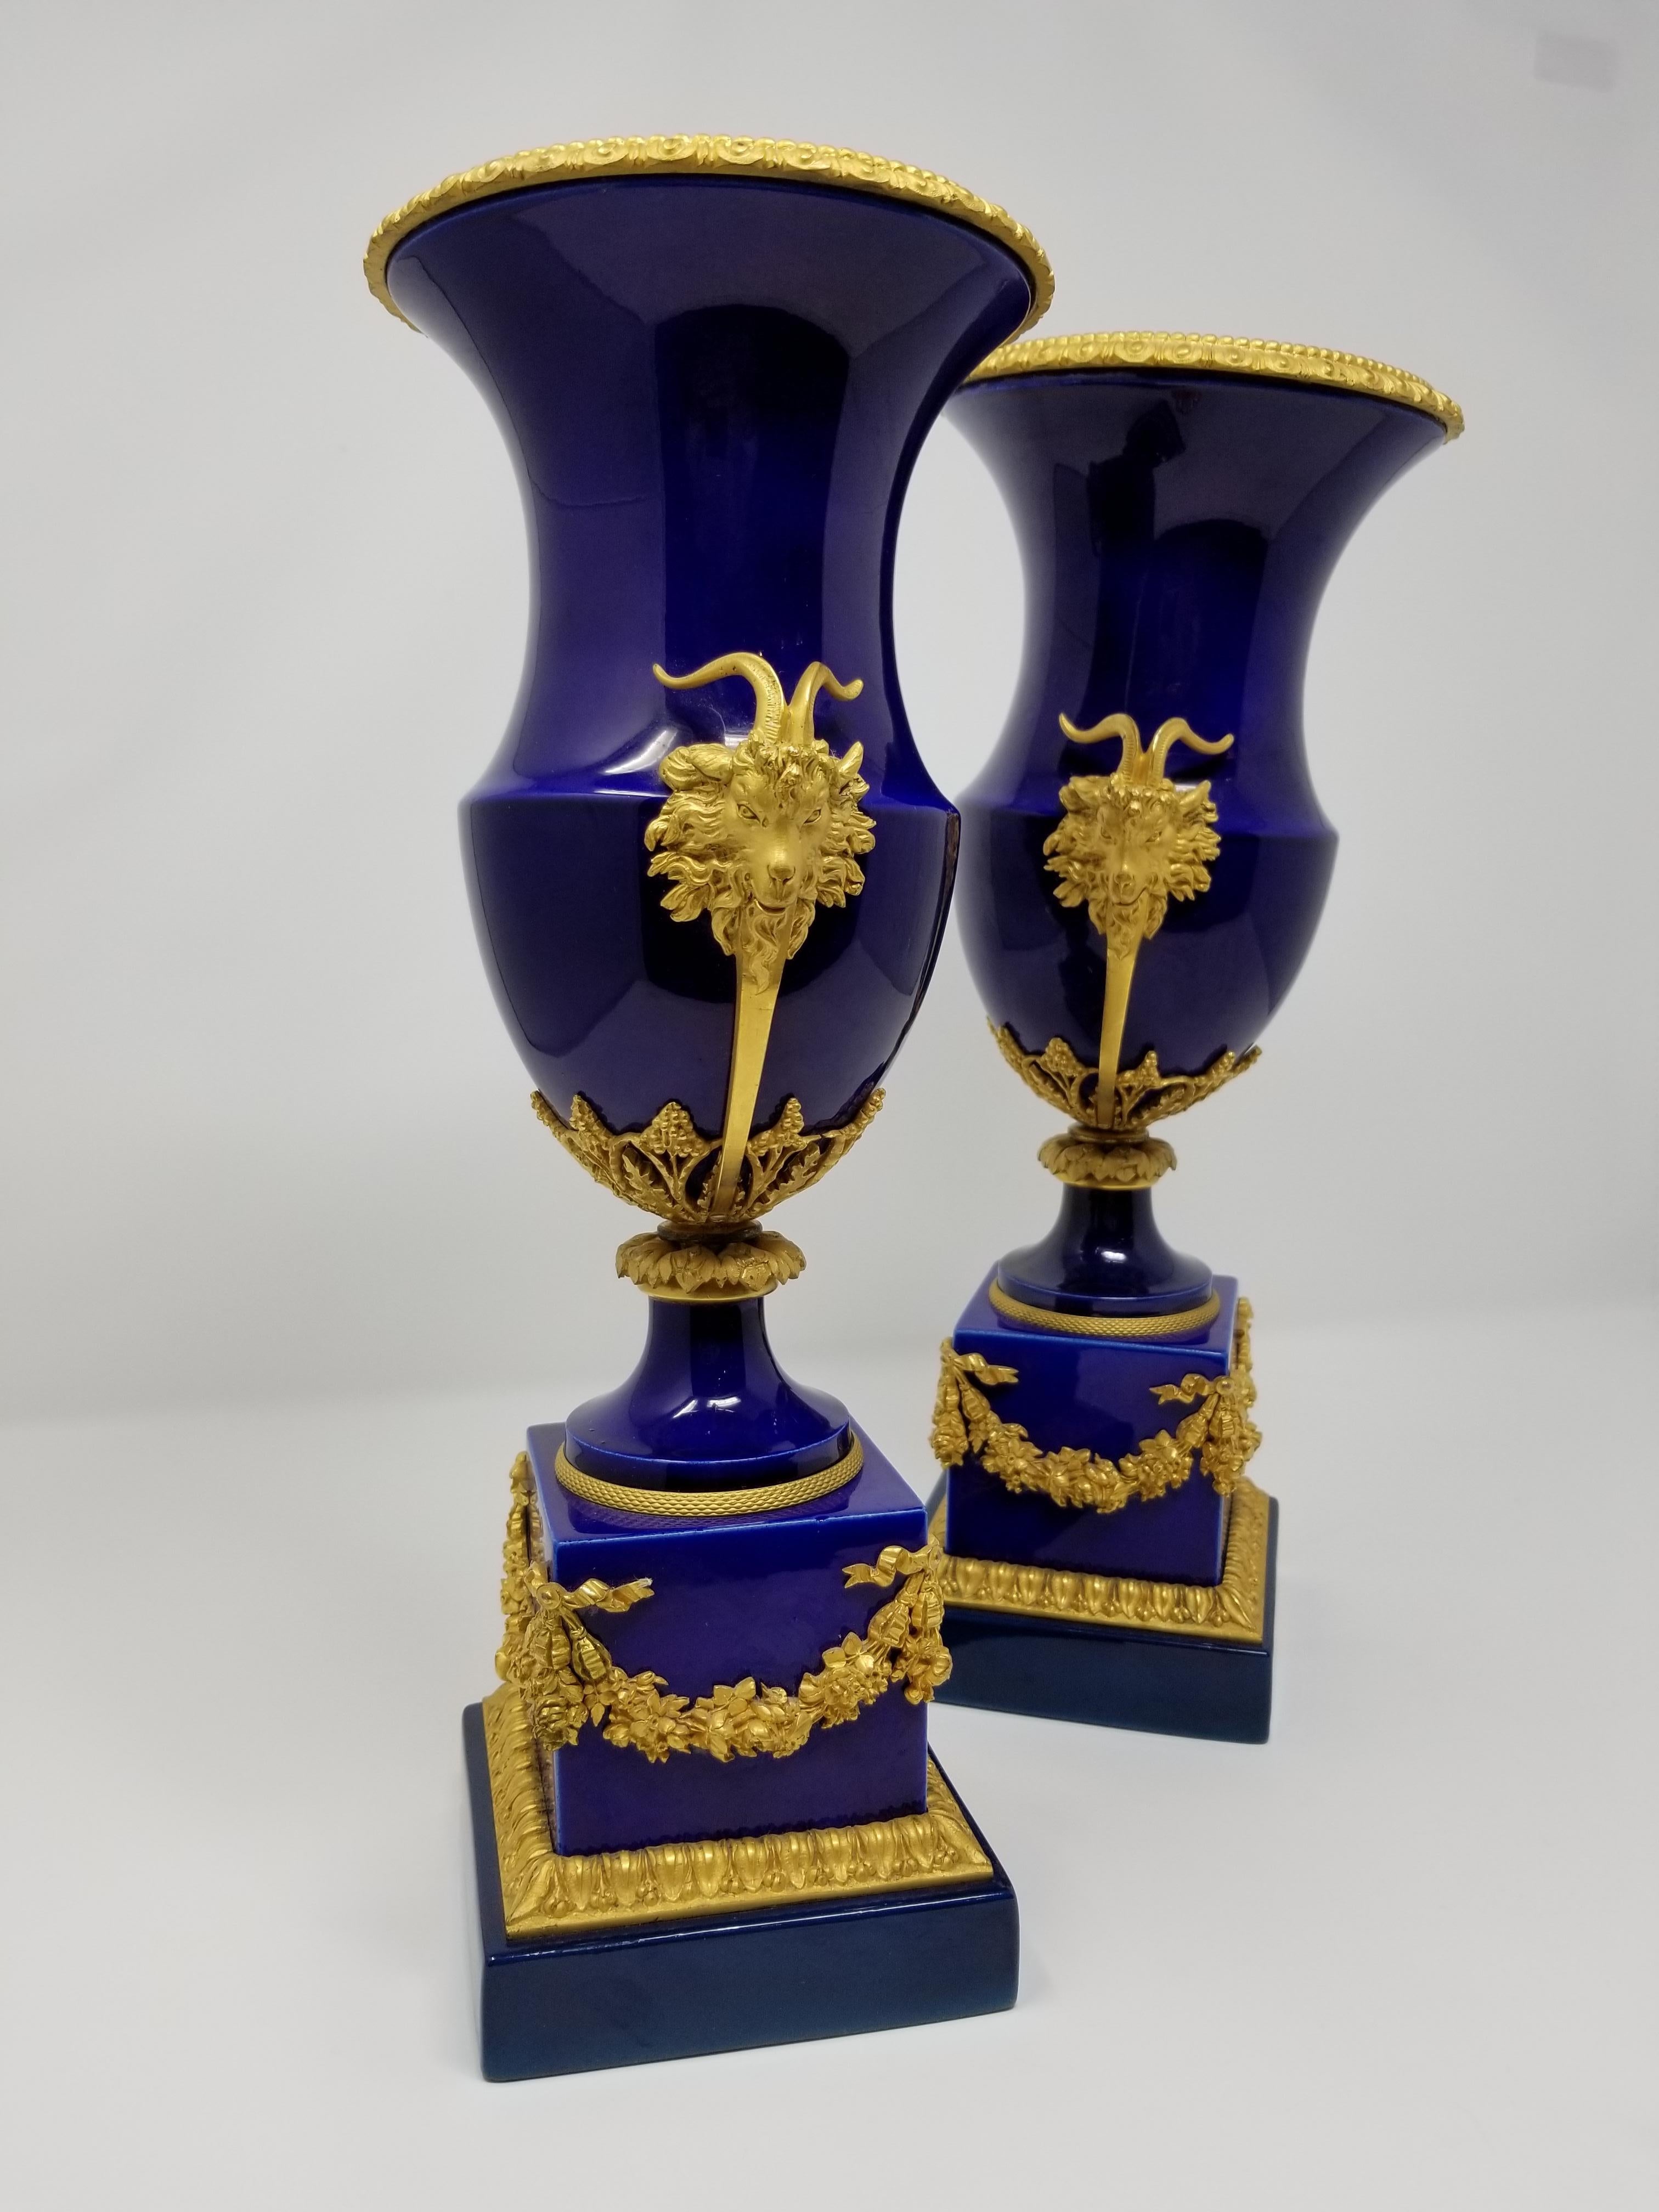 A beautiful pair of 19th century French Louis XVI style Sevres cobalt blue and ormolu-mounted vases with rams heads and wreaths. The porcelain body is beautifully painted with the signature Sevres Royal cobalt blue. The square shaped base is